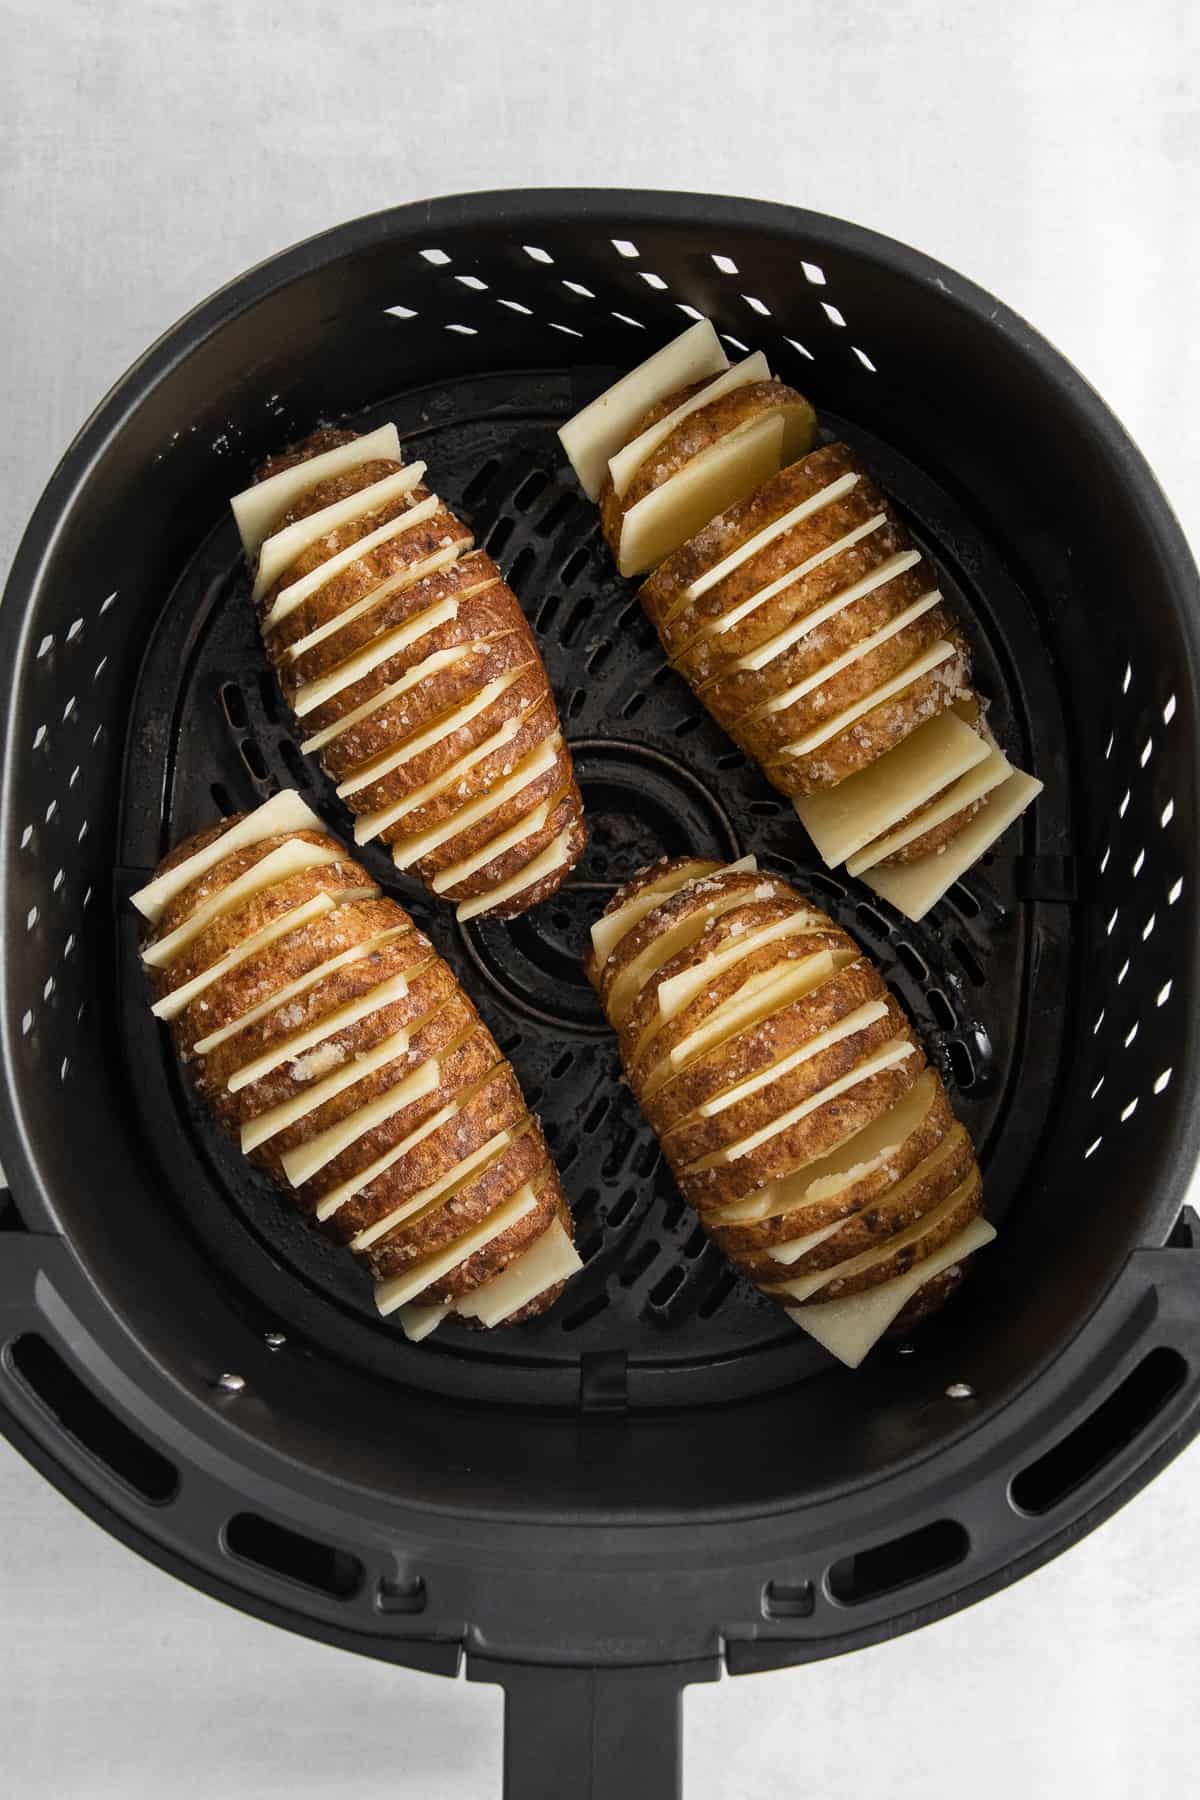 Hasselback potatoes stuffed with cheese in an air fryer.